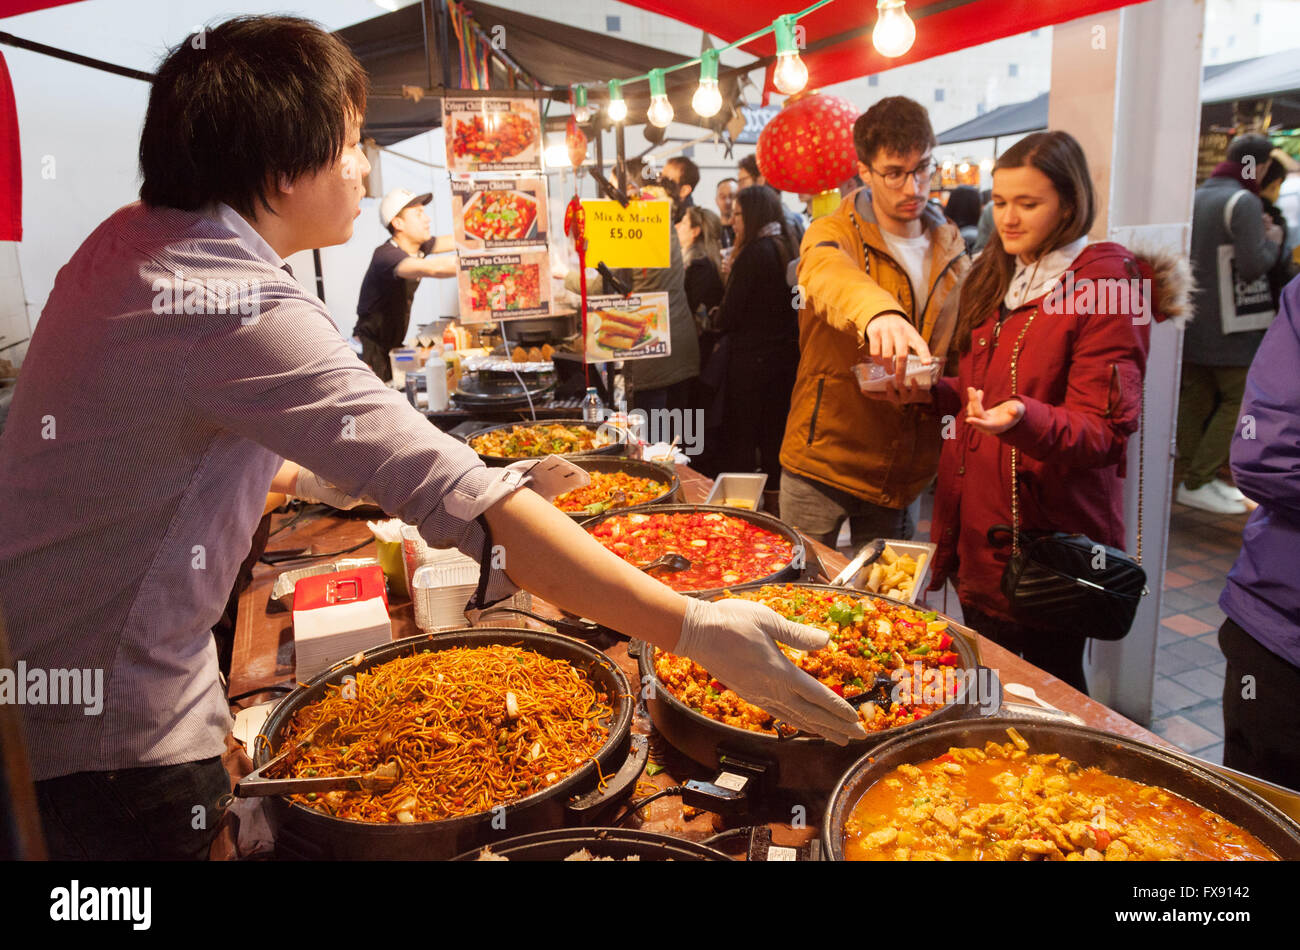 London market; People buying street food at a chinese street food stall, example of multicultural Britain,Brick Lane Spitalfields, London East End, UK Stock Photo